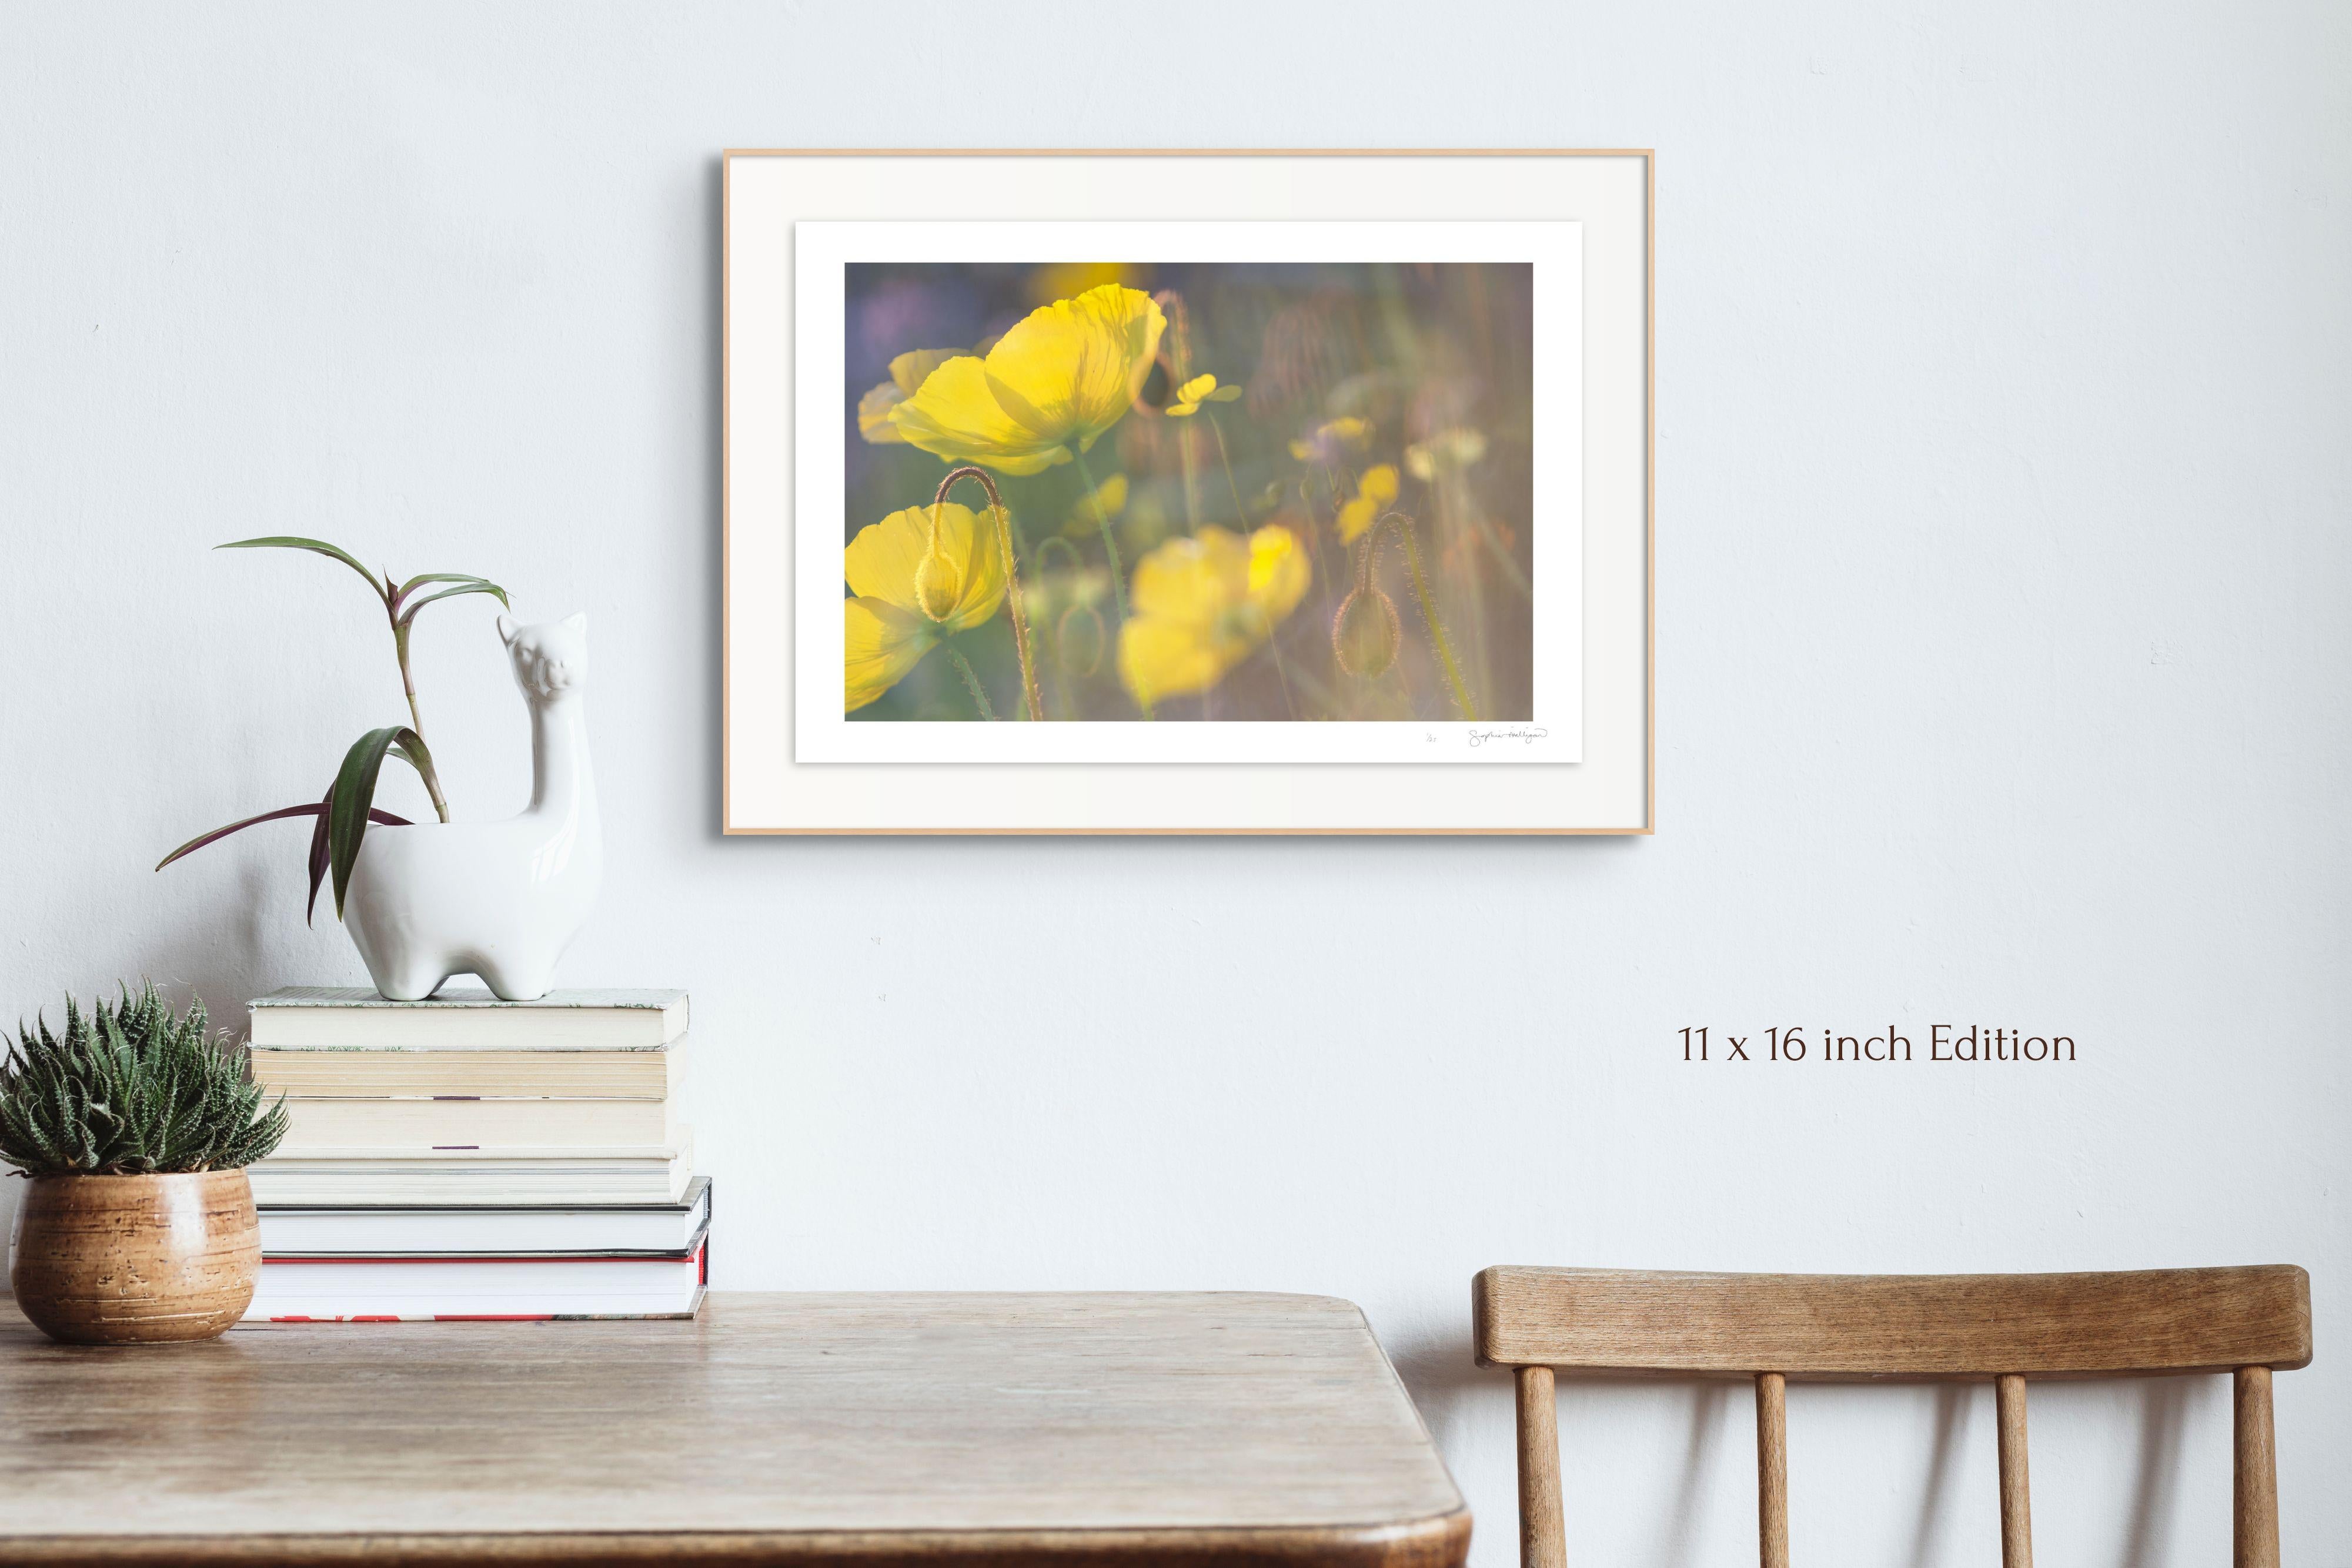 'Yellow Poppies' ('Mono No Aware' Series)
Limited edition archival photograph. Unframed, hand signed and numbered
_________________
Buds, blooms, and the fading glories of Icelandic poppies capture the glow of the evening sun. Using intricate